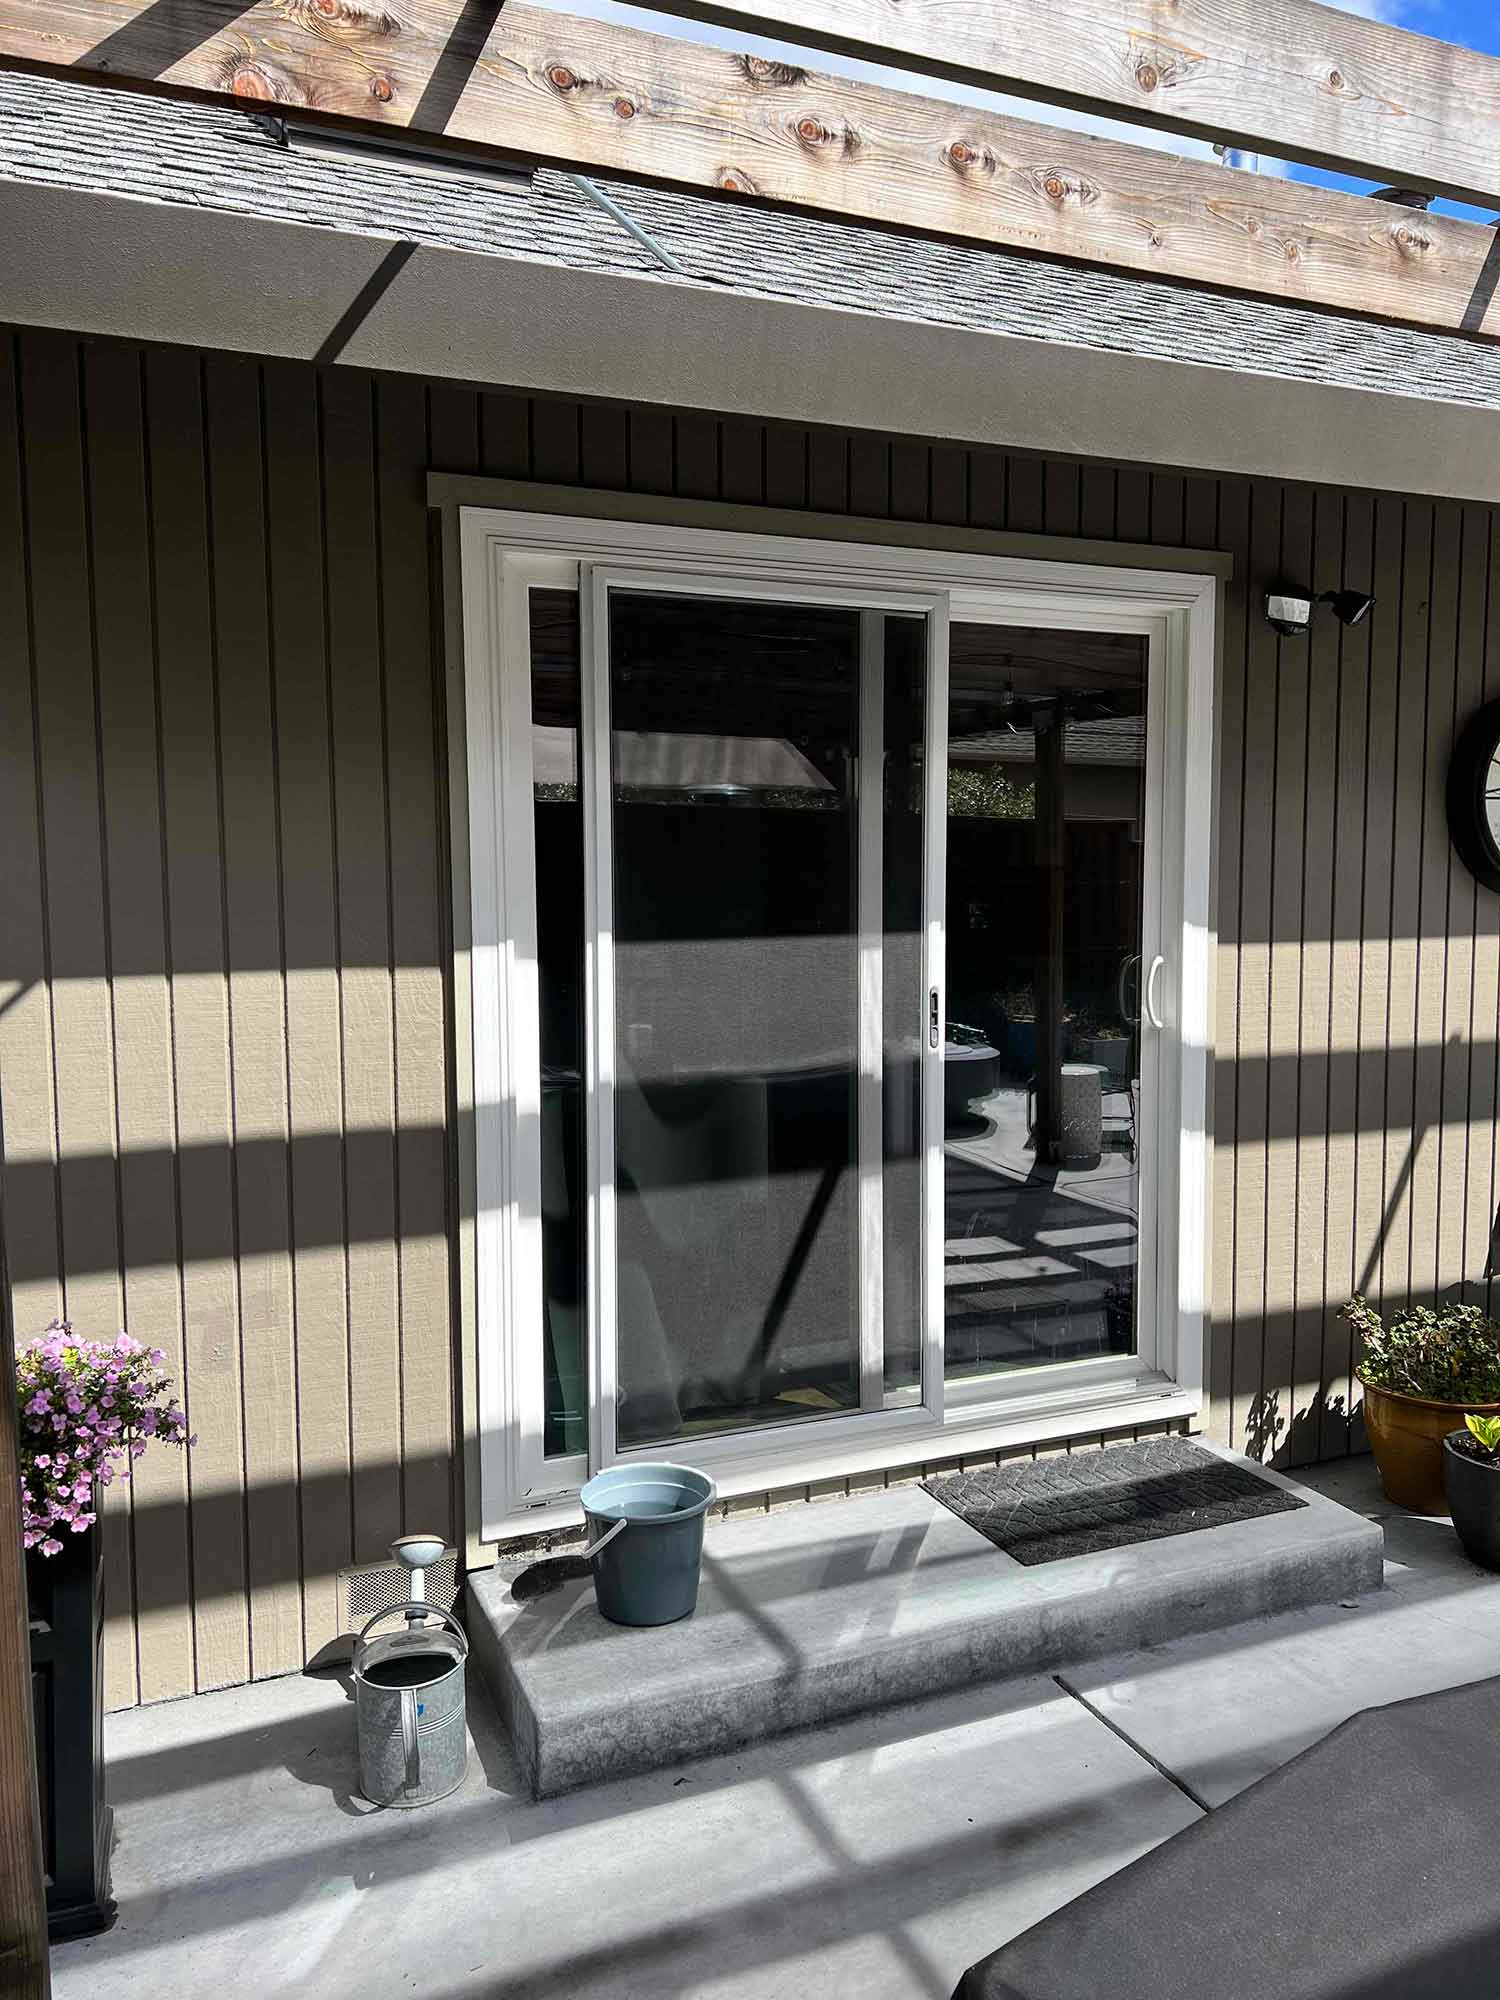 The Best Window Film for Healdsburg, CA homes is the one that solves the problem. Let ClimatePro match you with the best 3M Window Film.